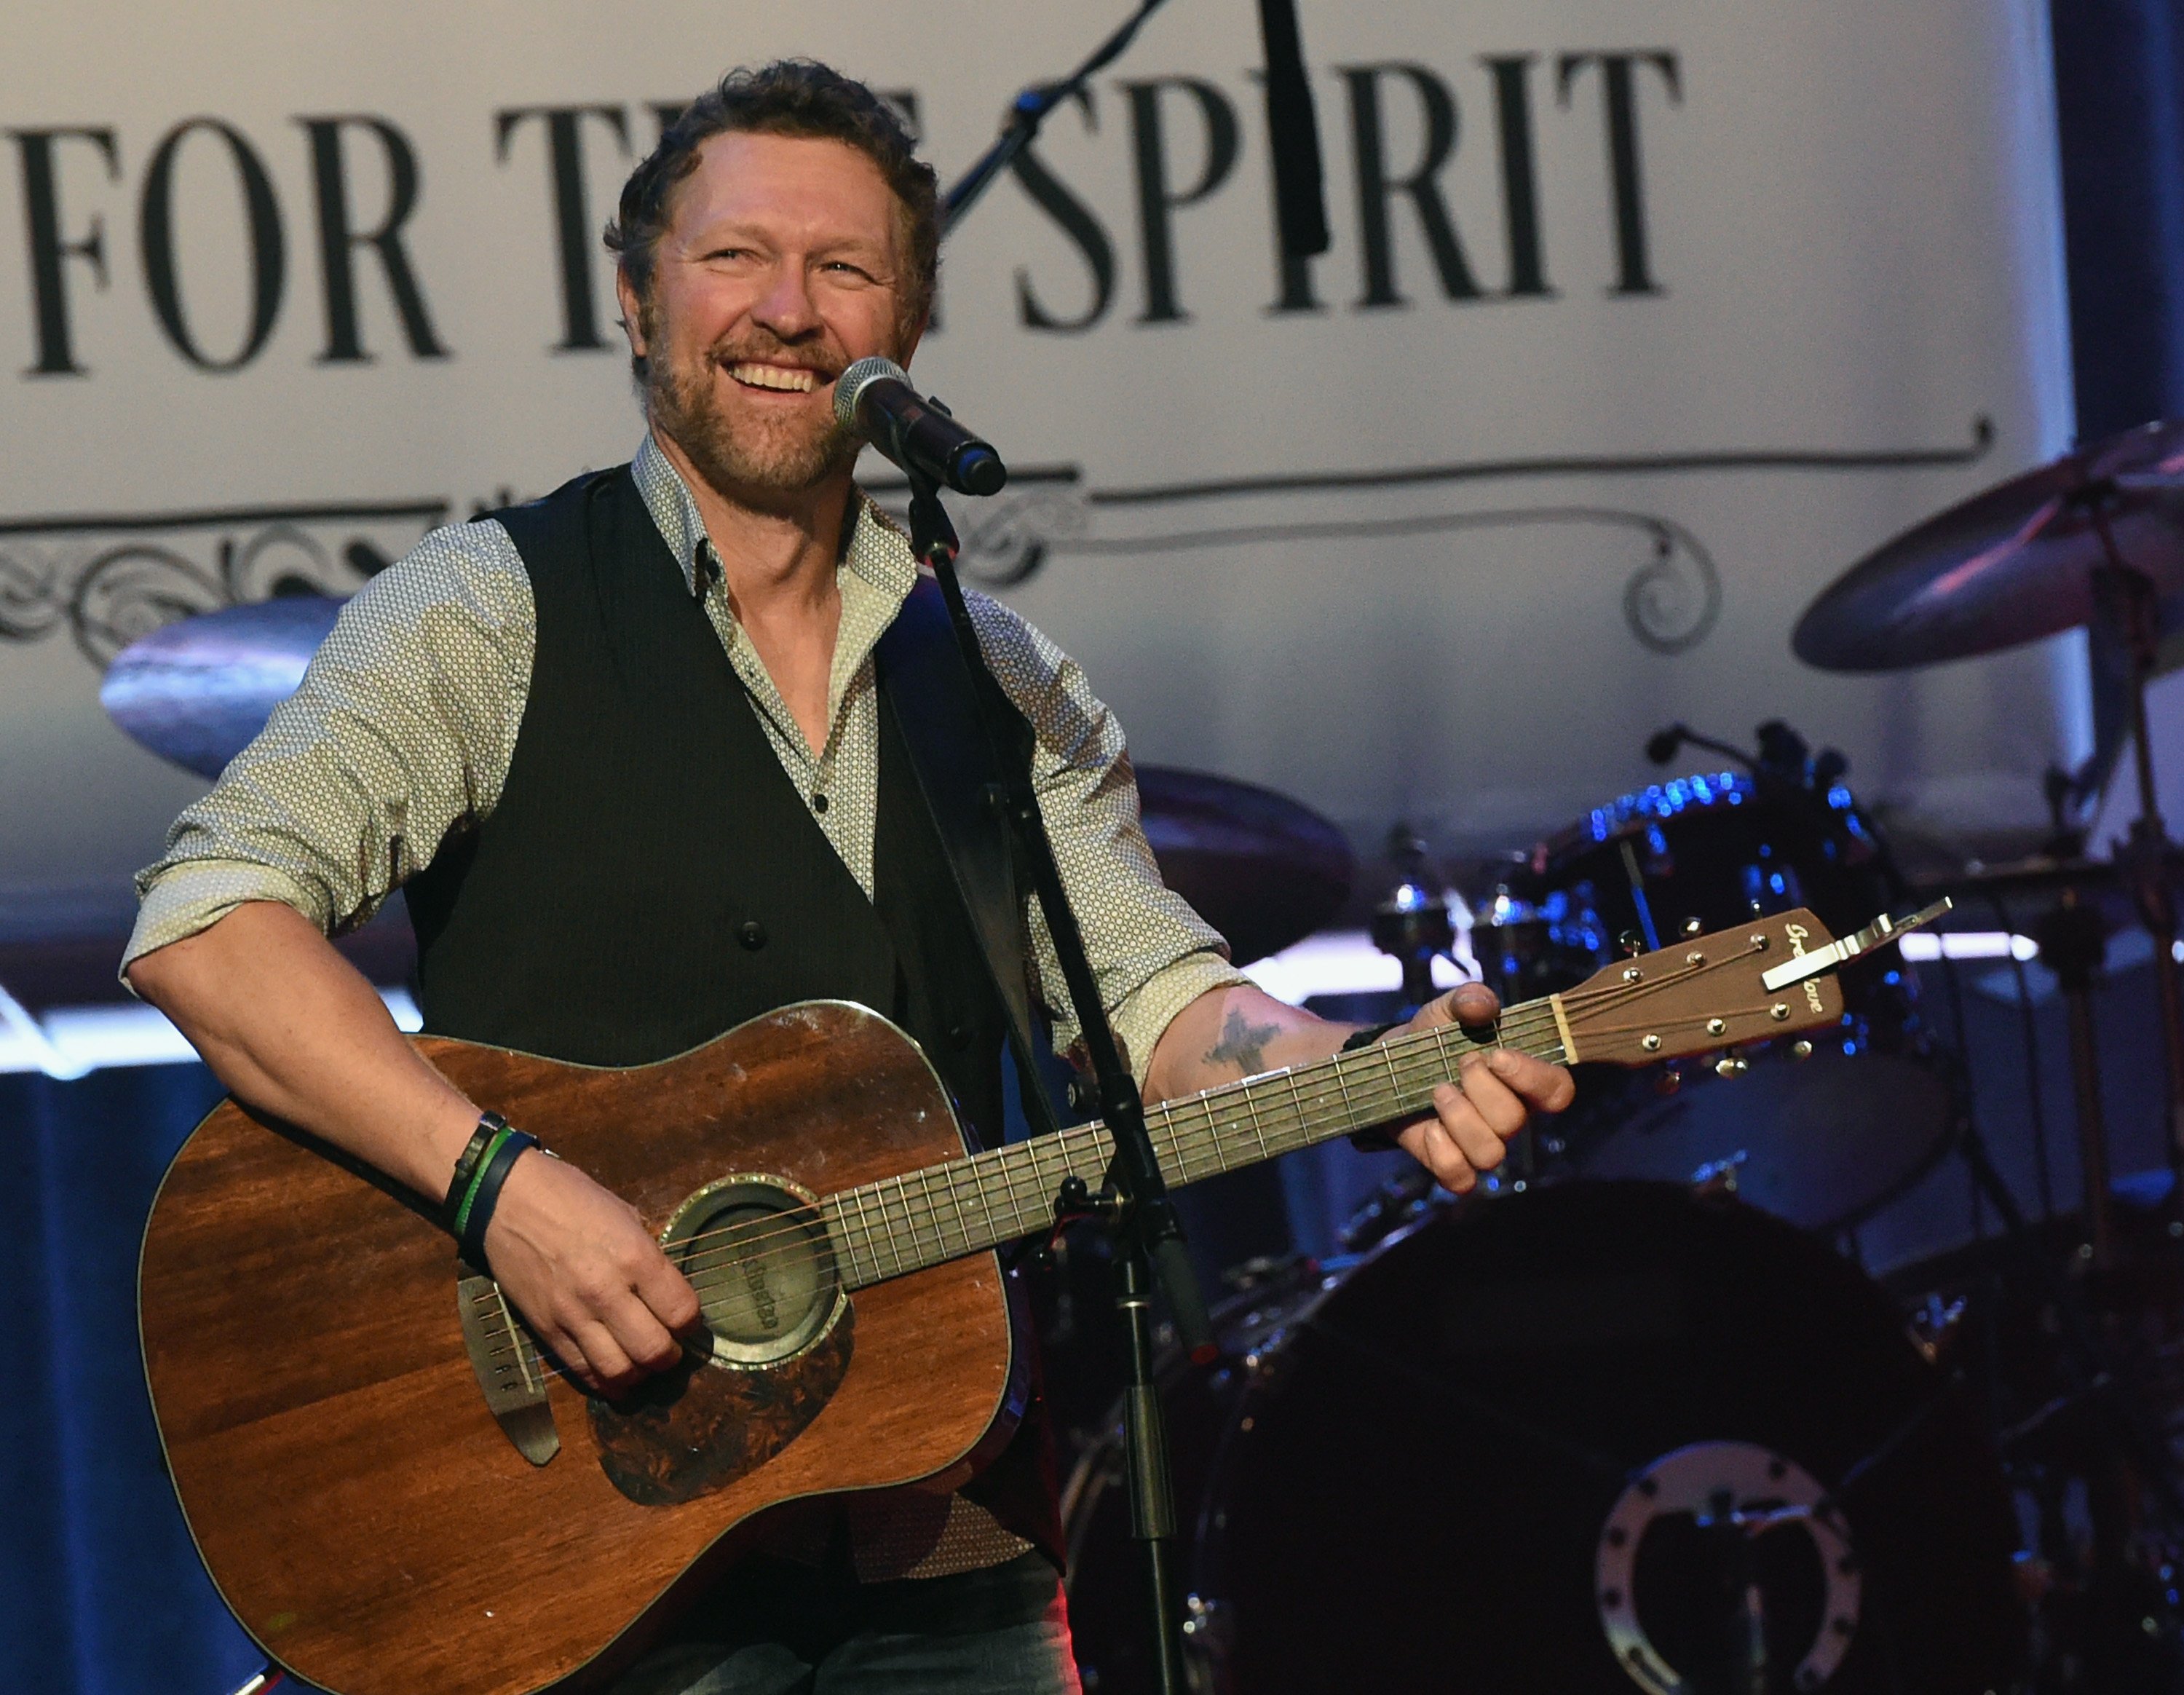 Craig Morgan performs during Sam's Place - Music For The Spirit 2017 at Ryman Auditorium on May 7, 2017, in Nashville, Tennessee. | Source: Getty Images